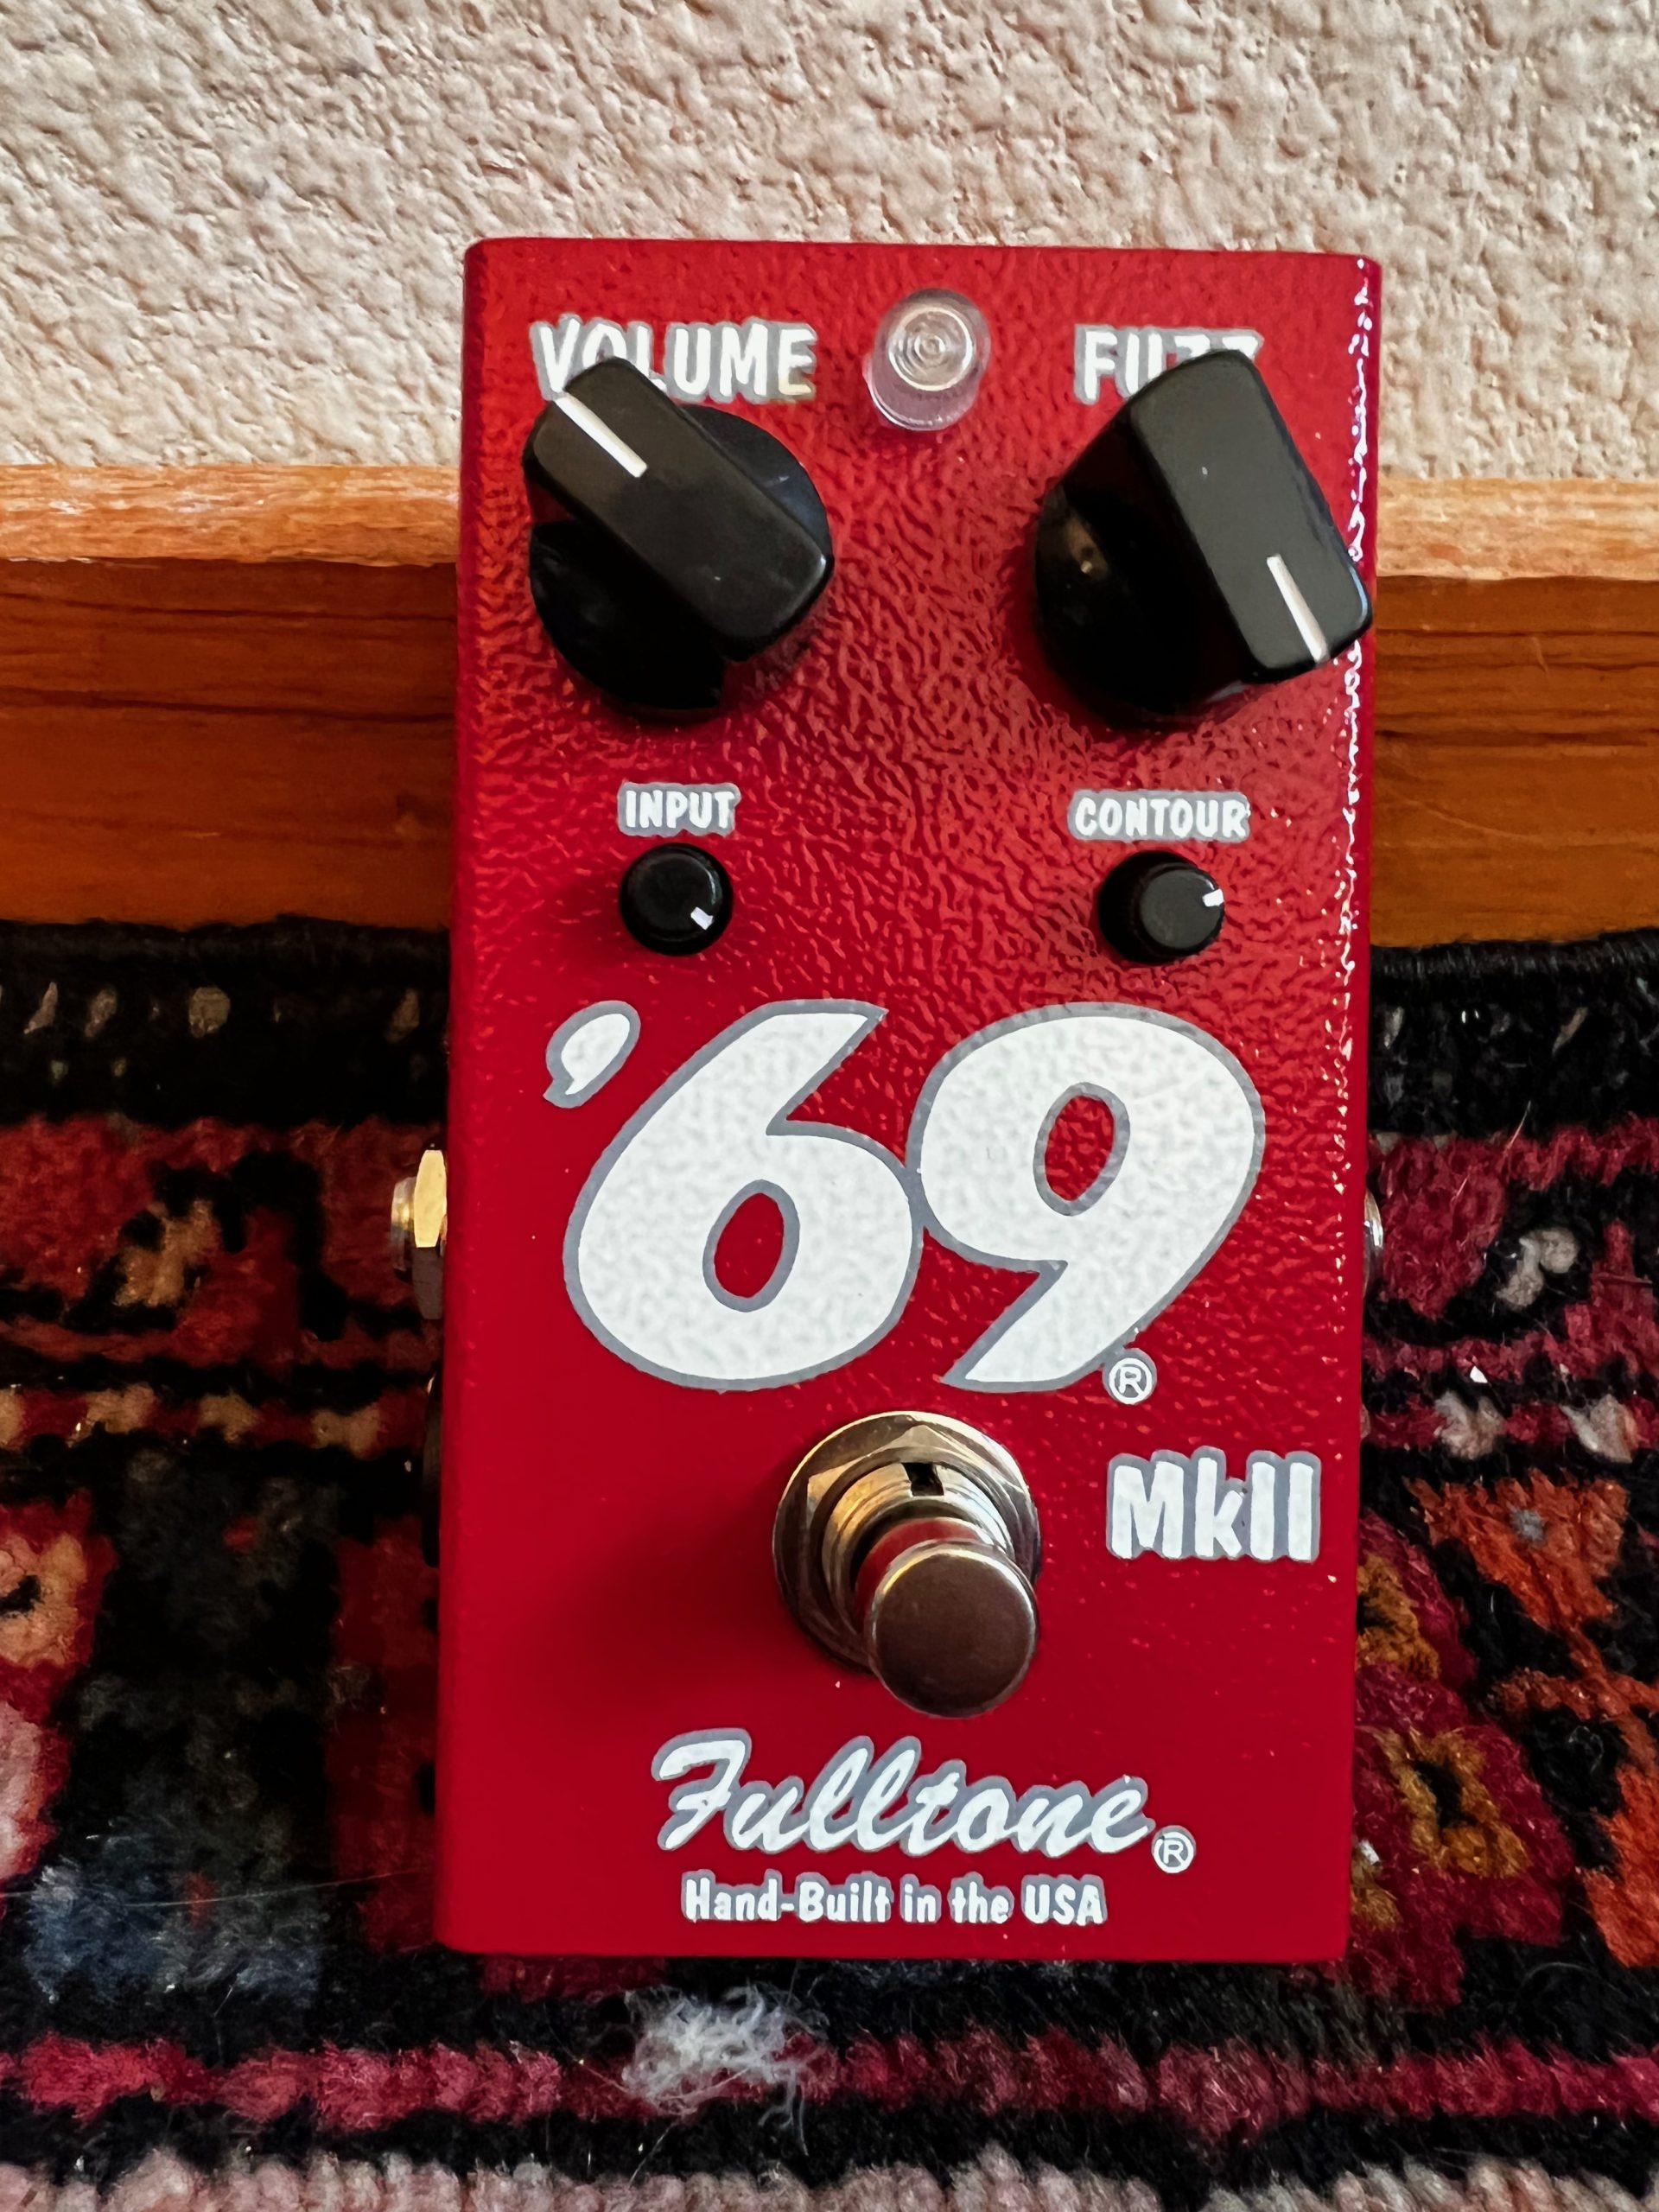 NEW Fulltone '69 mkII Fuzz Guitar Effects Pedal - Eclectic Sounds